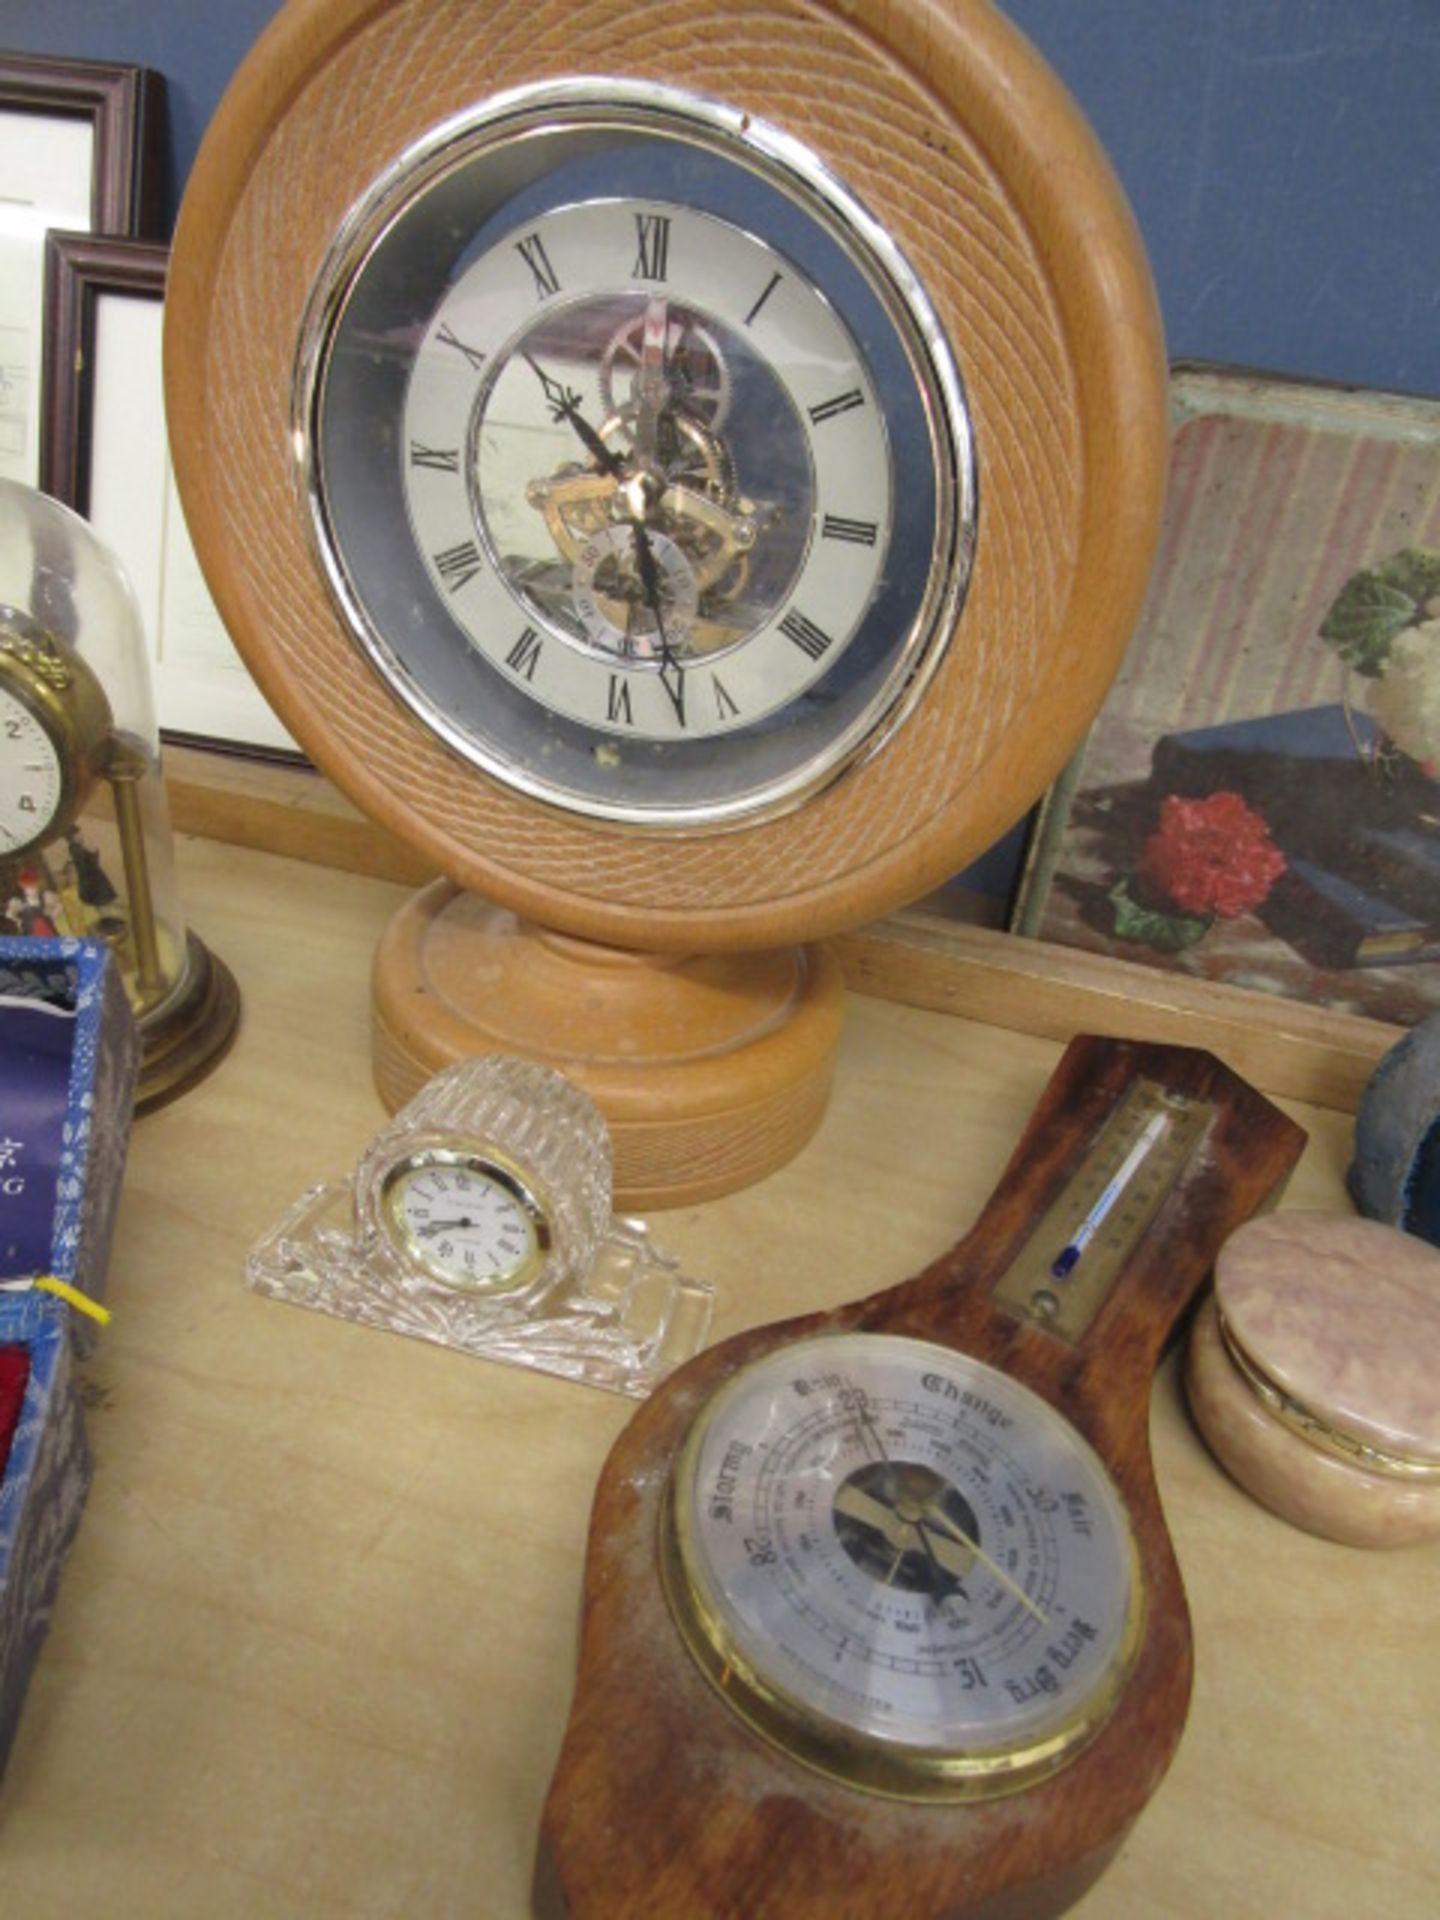 Collectors lot to inc clocks, barometer, tins & buttons, Chinese healing balls etc etc - Image 4 of 8